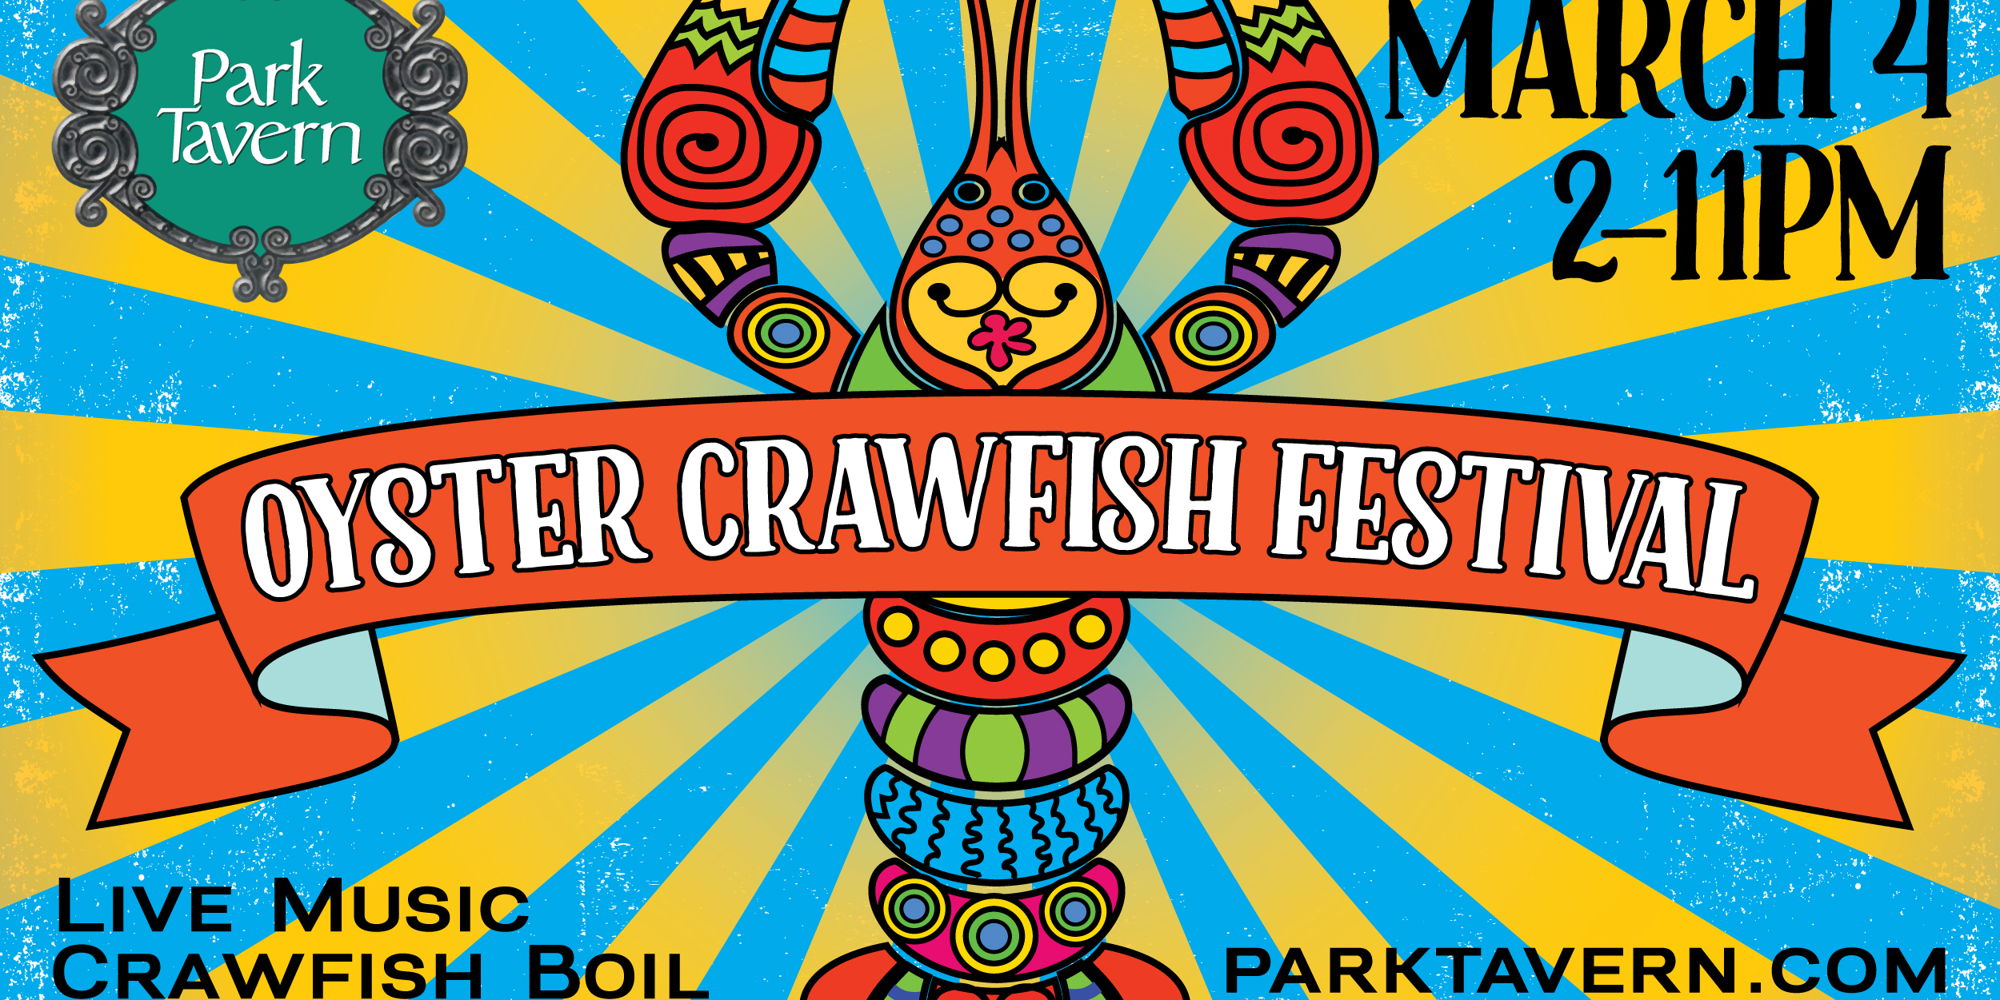 20th Annual Oyster Crawfish Festival promotional image